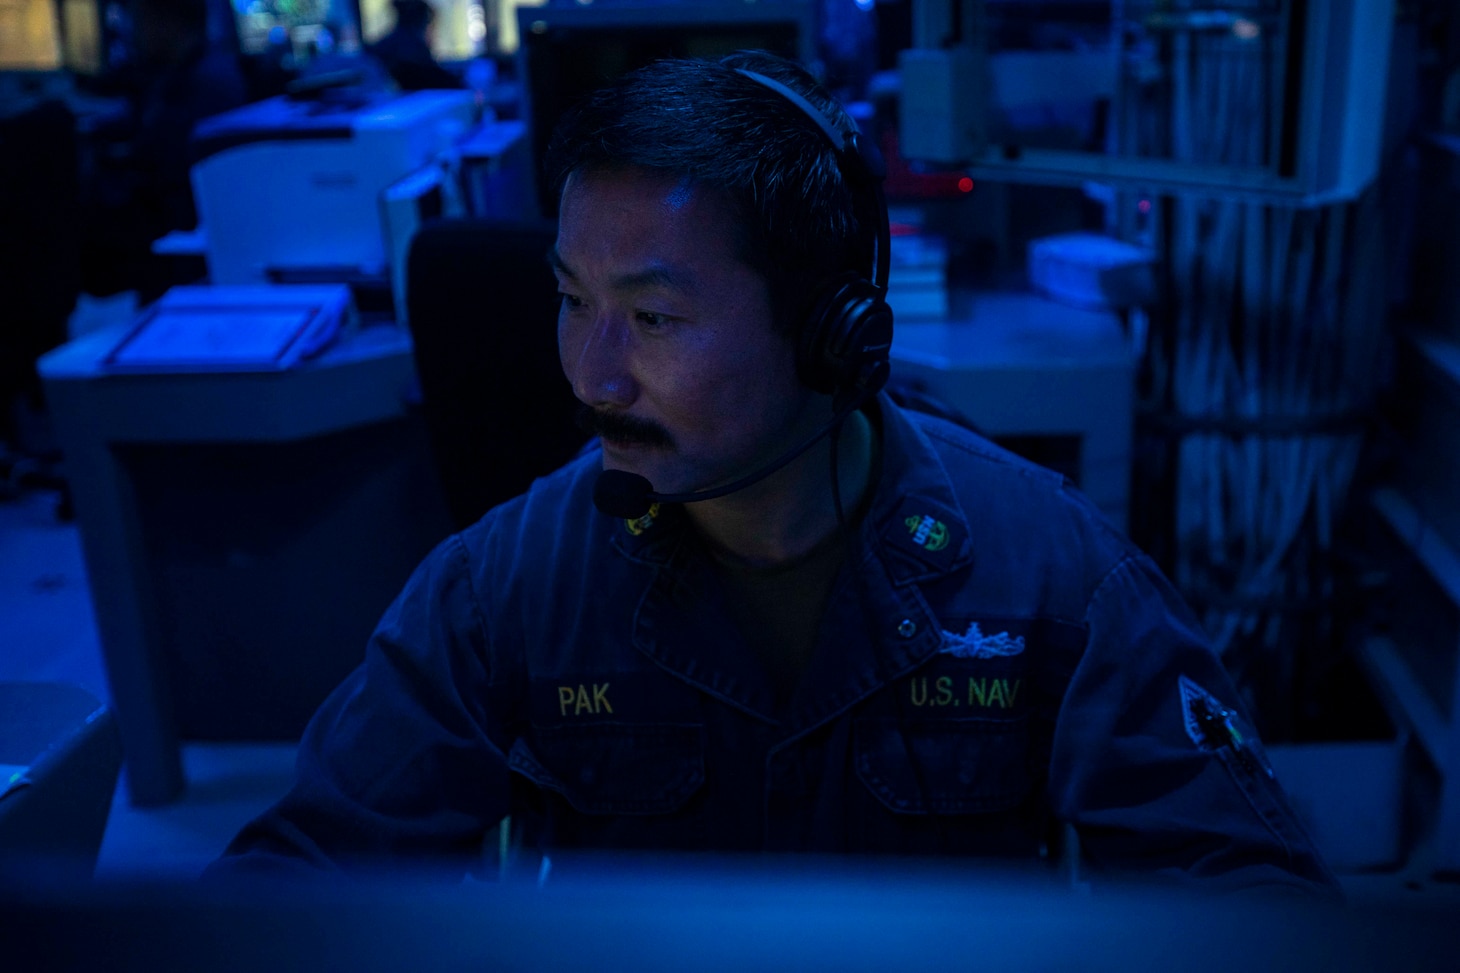 211122-N-QF023-1025 TAIWAN STRAIT (Nov. 22, 2021) Chief Electronics Technician Siggy Pak, from Milpitas, Calif., stands watch as the combat systems coordinator aboard Arleigh Burke-class guided-missile destroyer USS Milius (DDG 69) as the ship conducts a routine transit through the Taiwan Strait Nov. 22, 2021. Milius, assigned to Commander, Task Force (CTF) 71/Destroyer Squadron (DESRON) 15, is forward-deployed to the U.S. 7th Fleet area of operations in support of a free and open Indo-Pacific. (U.S. Navy photo by Mass Communication Specialist Seaman Apprentice RuKiyah Mack).